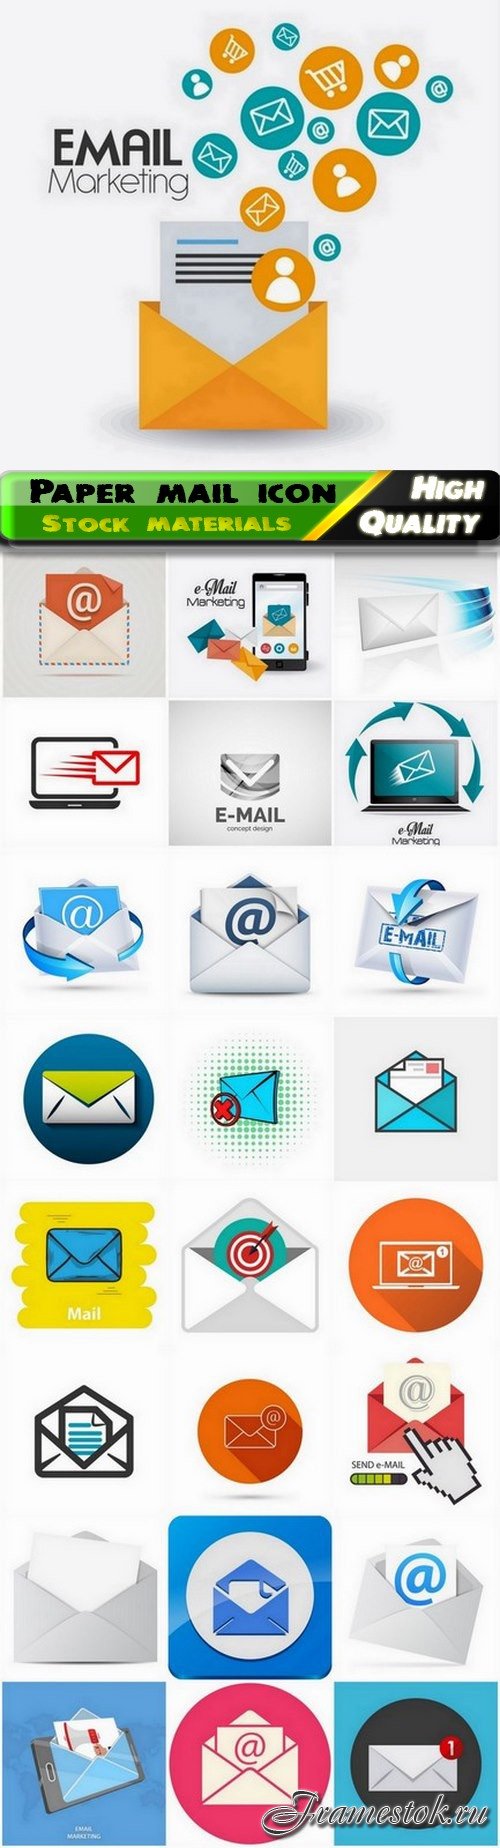 Icon and button for send paper mail to email - 25 Eps